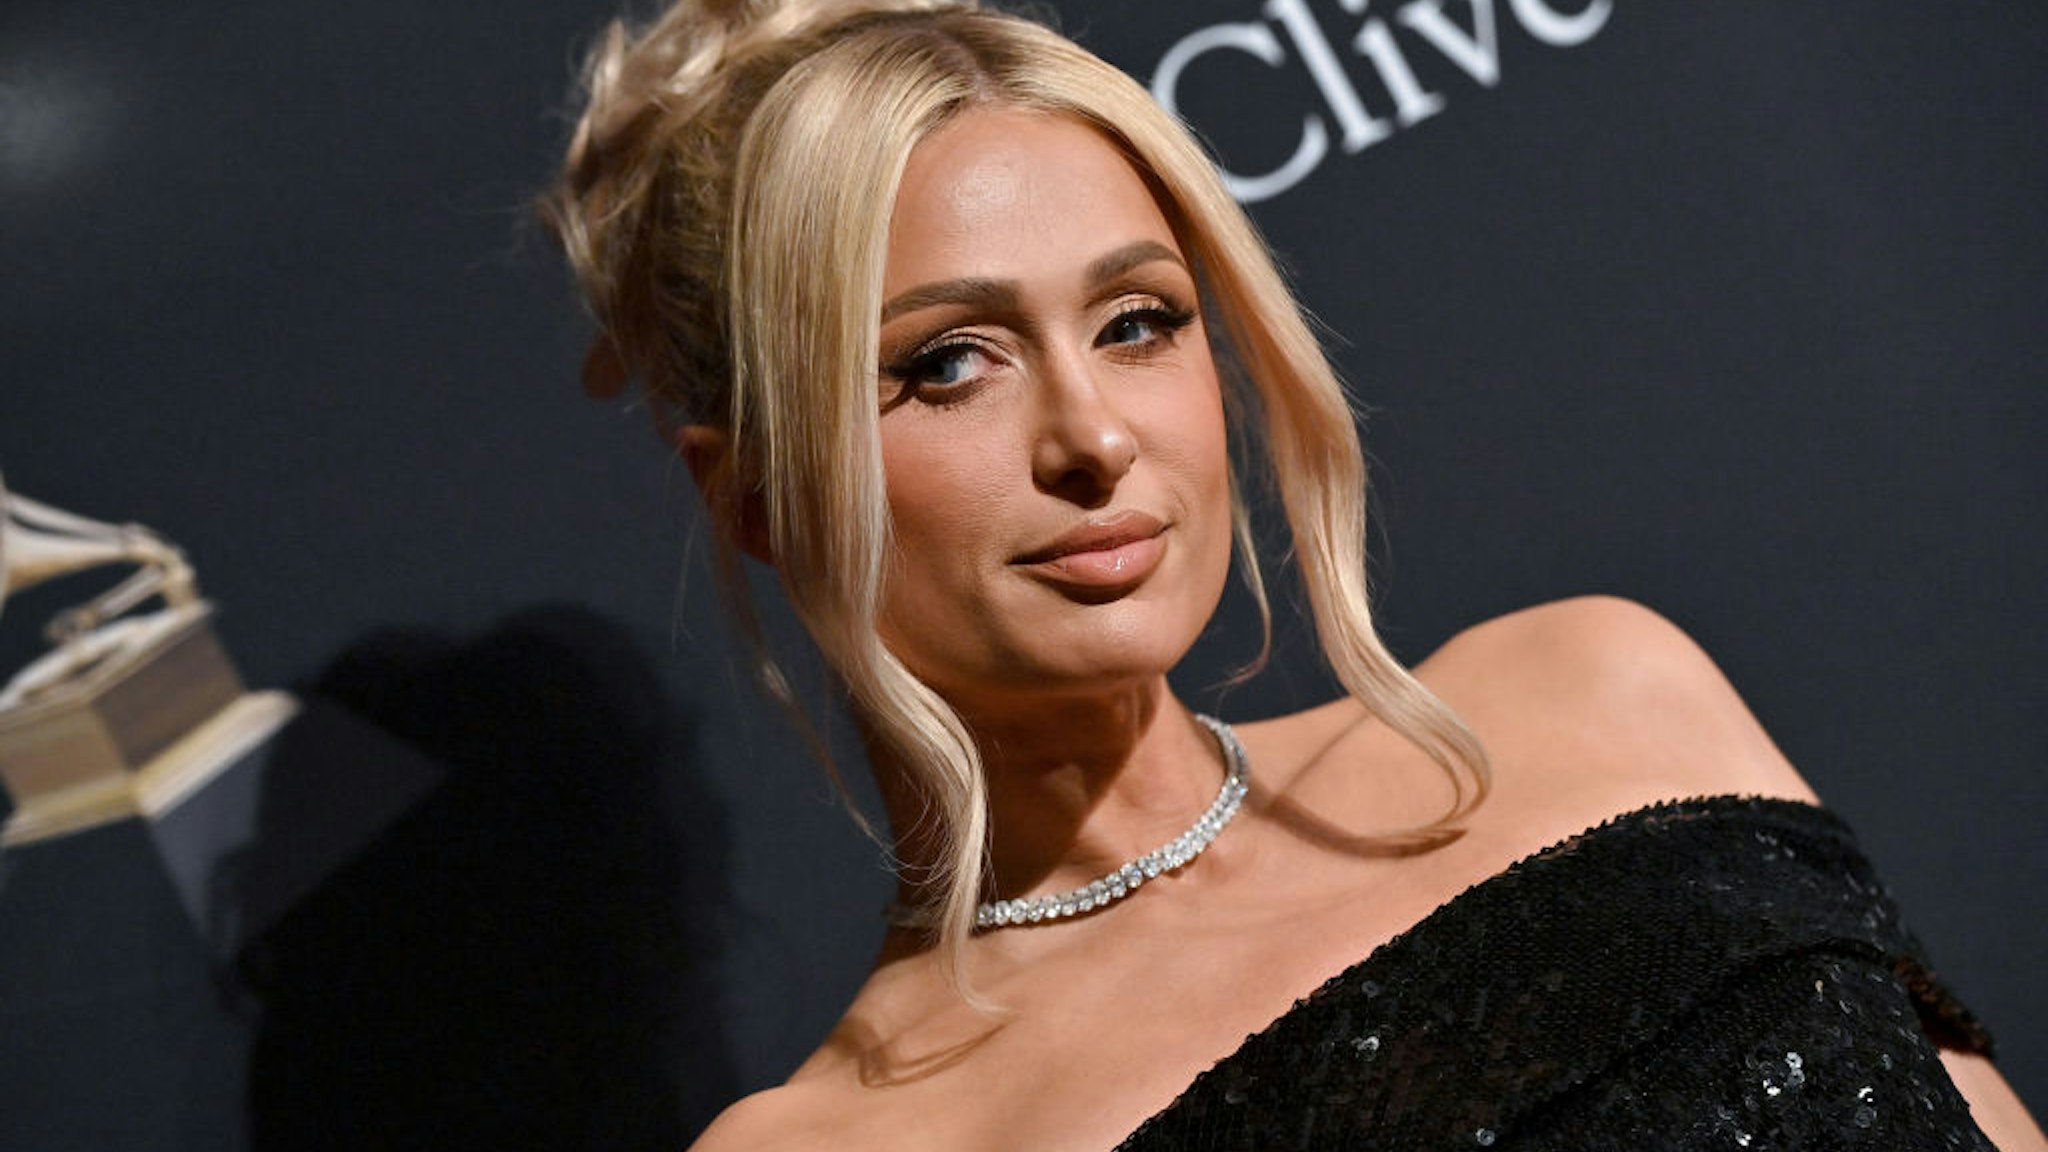 BEVERLY HILLS, CALIFORNIA - FEBRUARY 04: (FOR EDITORIAL USE ONLY) Paris Hilton attends the Pre-GRAMMY Gala &amp; GRAMMY Salute to Industry Icons Honoring Julie Greenwald &amp; Craig Kallman at The Beverly Hilton on February 04, 2023 in Beverly Hills, California. (Photo by Axelle/Bauer-Griffin/FilmMagic)